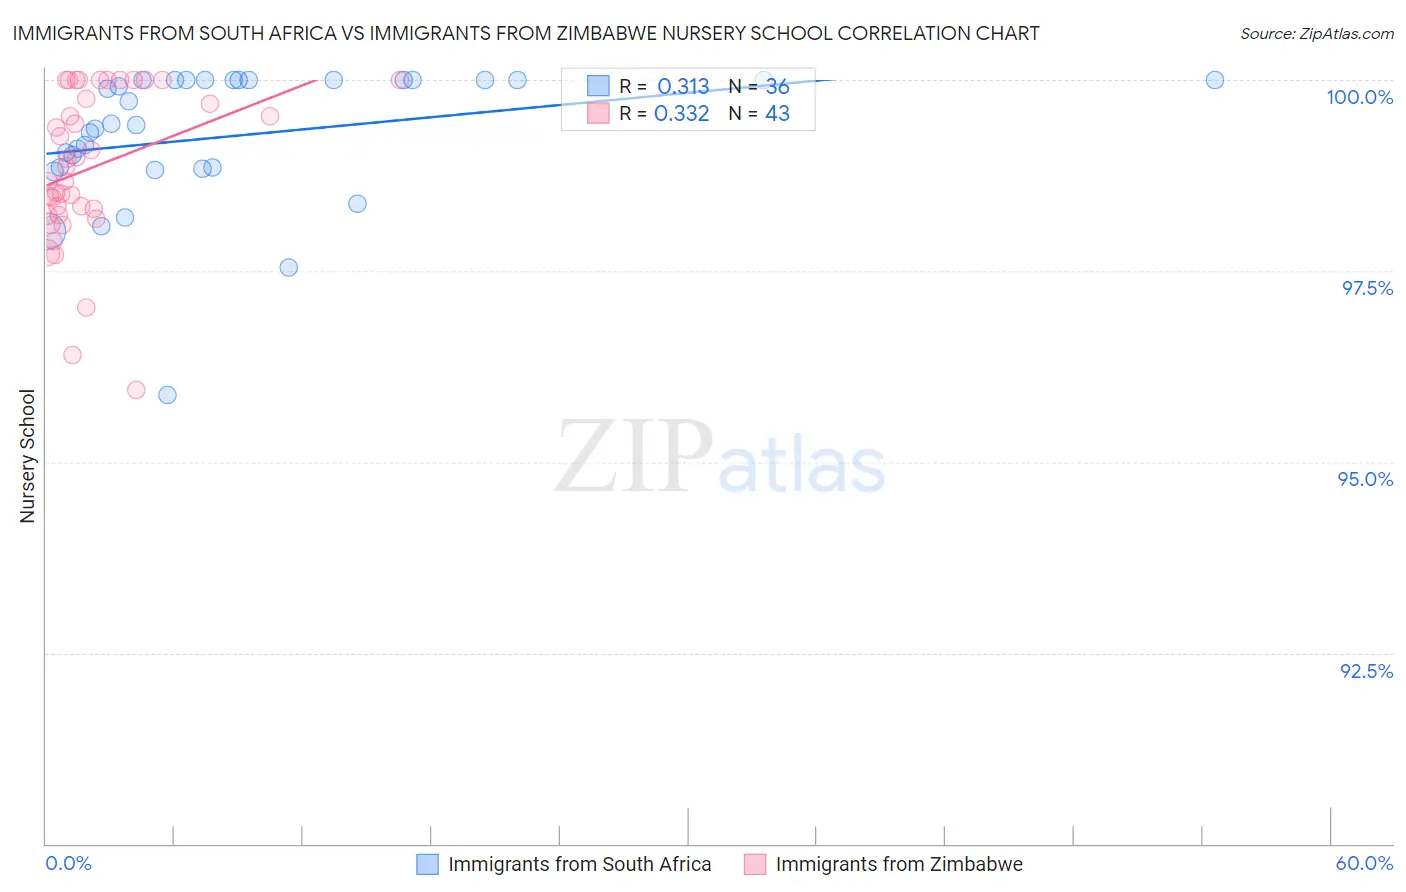 Immigrants from South Africa vs Immigrants from Zimbabwe Nursery School